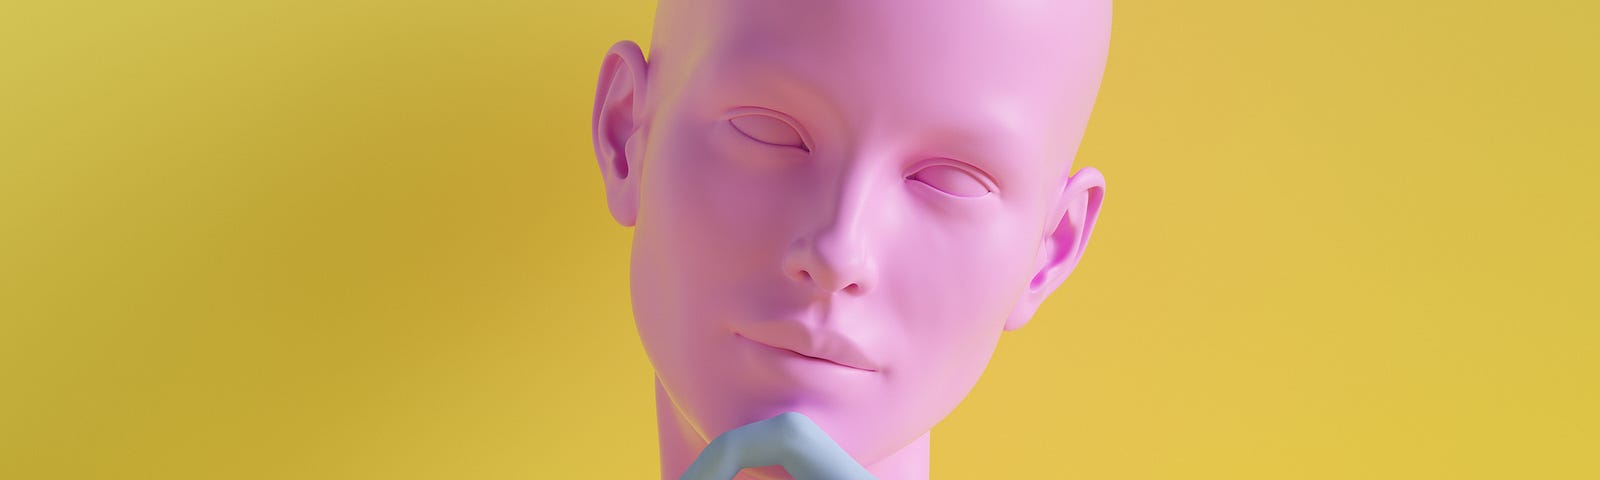 A 3D render of a human face with a finger on its chin, contemplative pose.